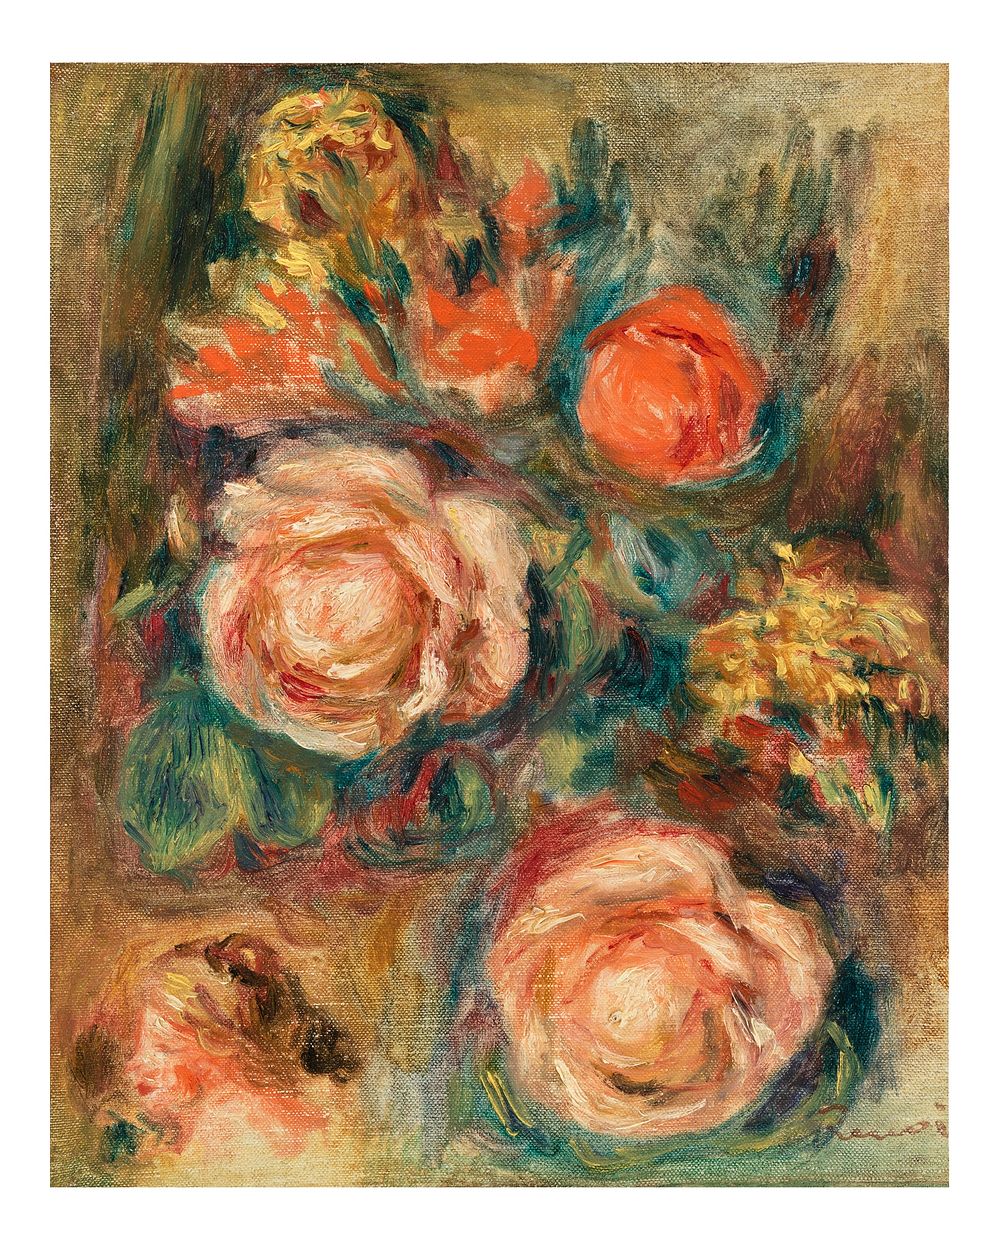 Pierre-Auguste Renoir poster, vintage Bouquet of Roses painting (1900). Original from Barnes Foundation. Digitally enhanced…